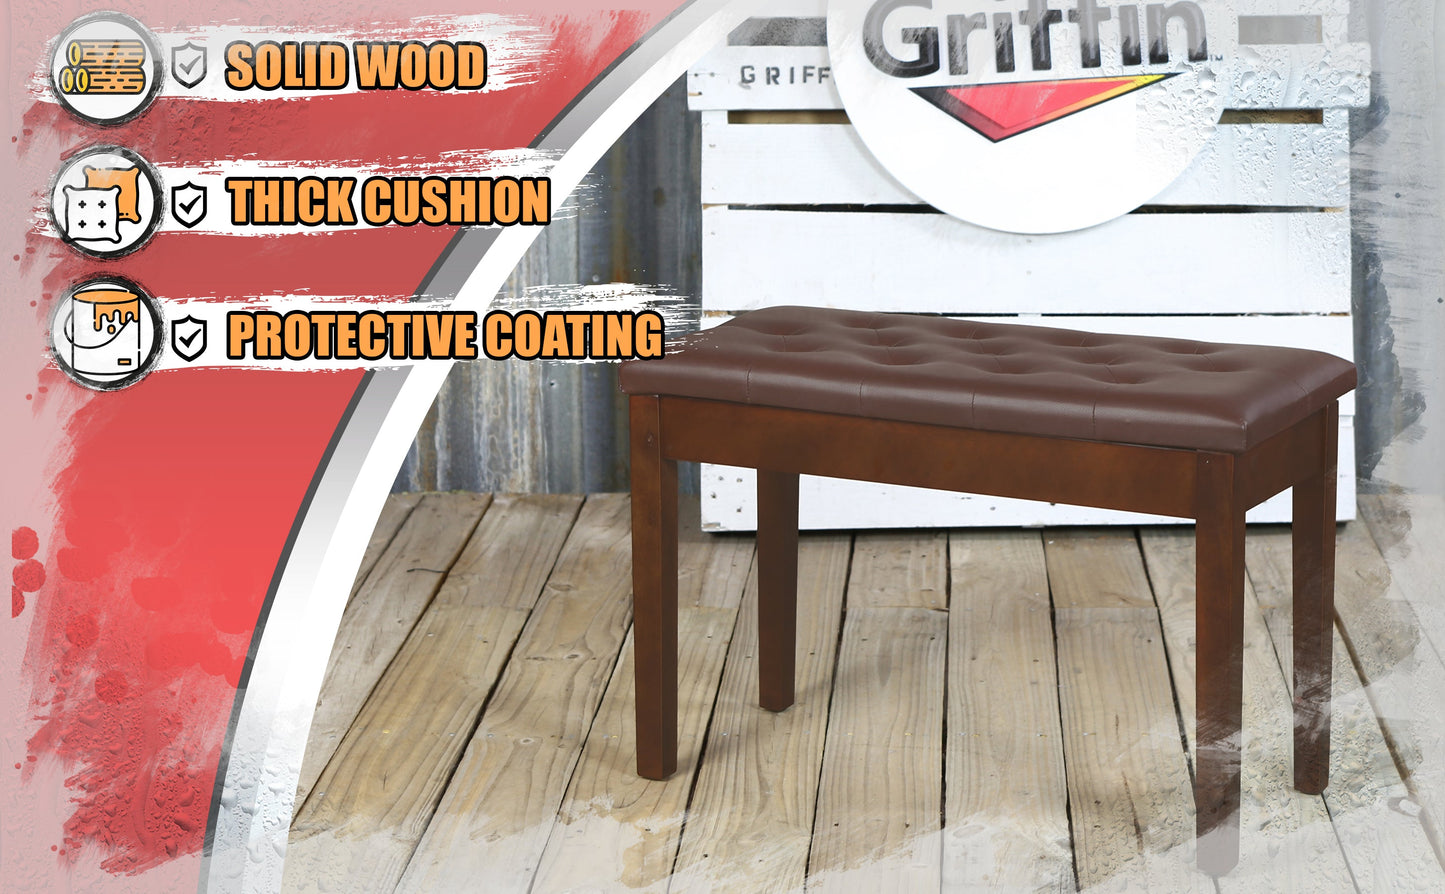 GRIFFIN Brown Wood PU Leather Piano Bench - Double Vintage Design, Ergonomic Chair Musician Keyboard